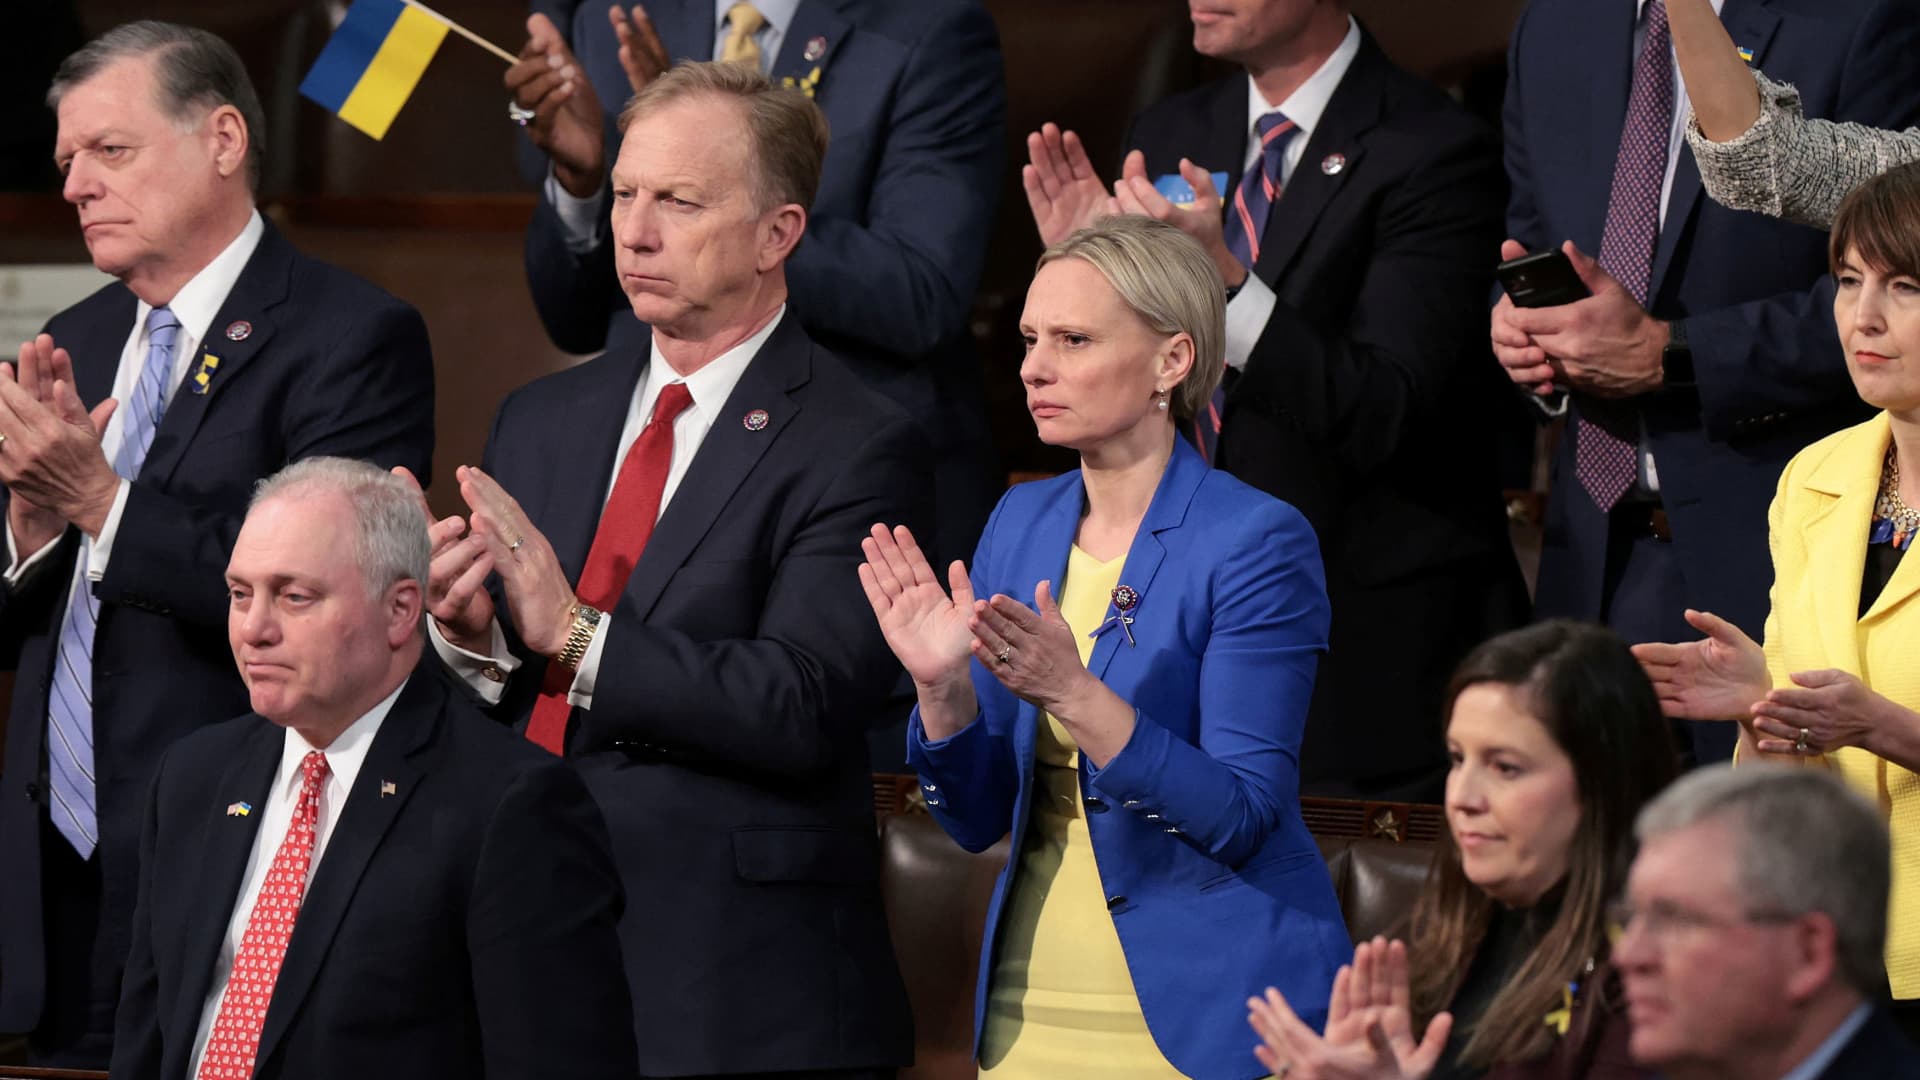 Ukrainian-American Rep. Victoria Spartz (R-IN) wears the colors of the Ukrainian flag as she and other Republicans applaud for U.S. President Joe Biden during the State of the Union address in the U.S. Capitol's House Chamber March 1, 2022 in Washington, DC, U.S.